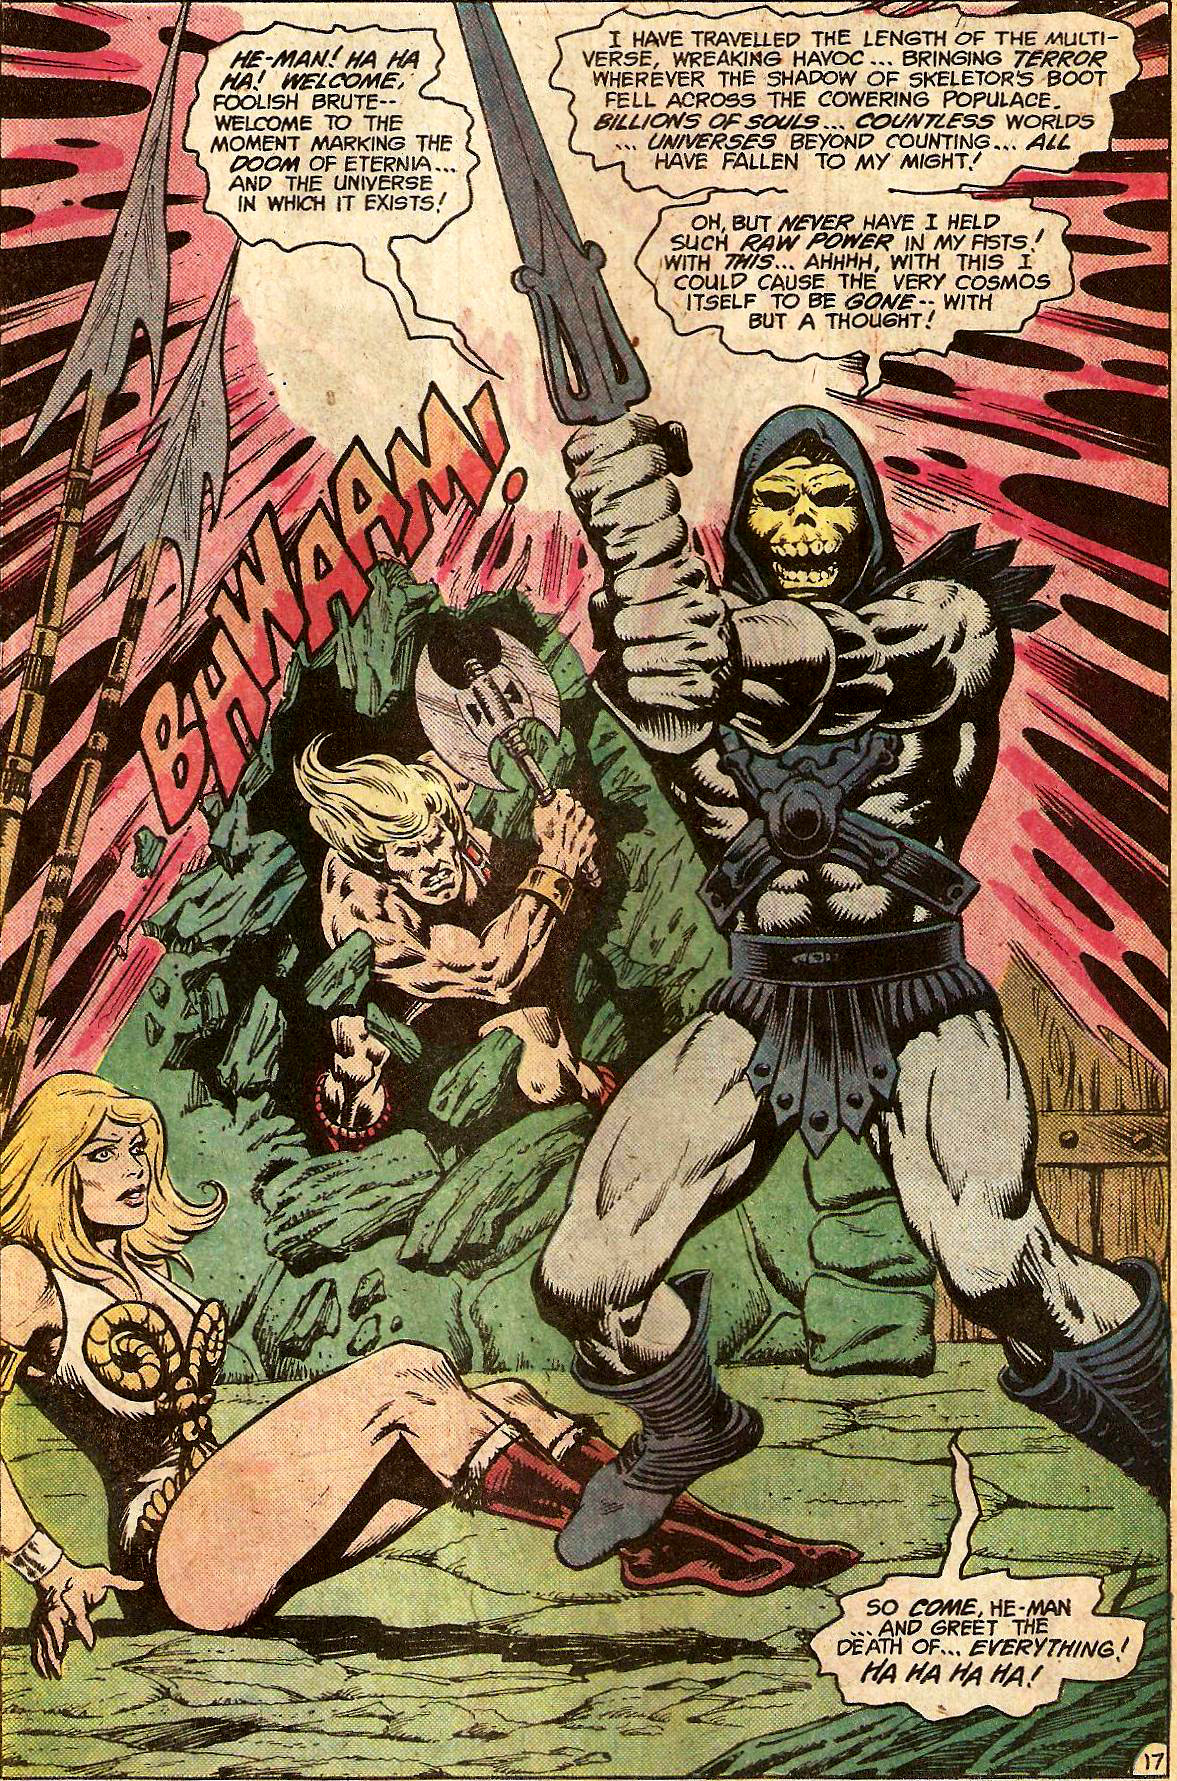 From Masters of the Universe (Vol. 1) #3 (1983)